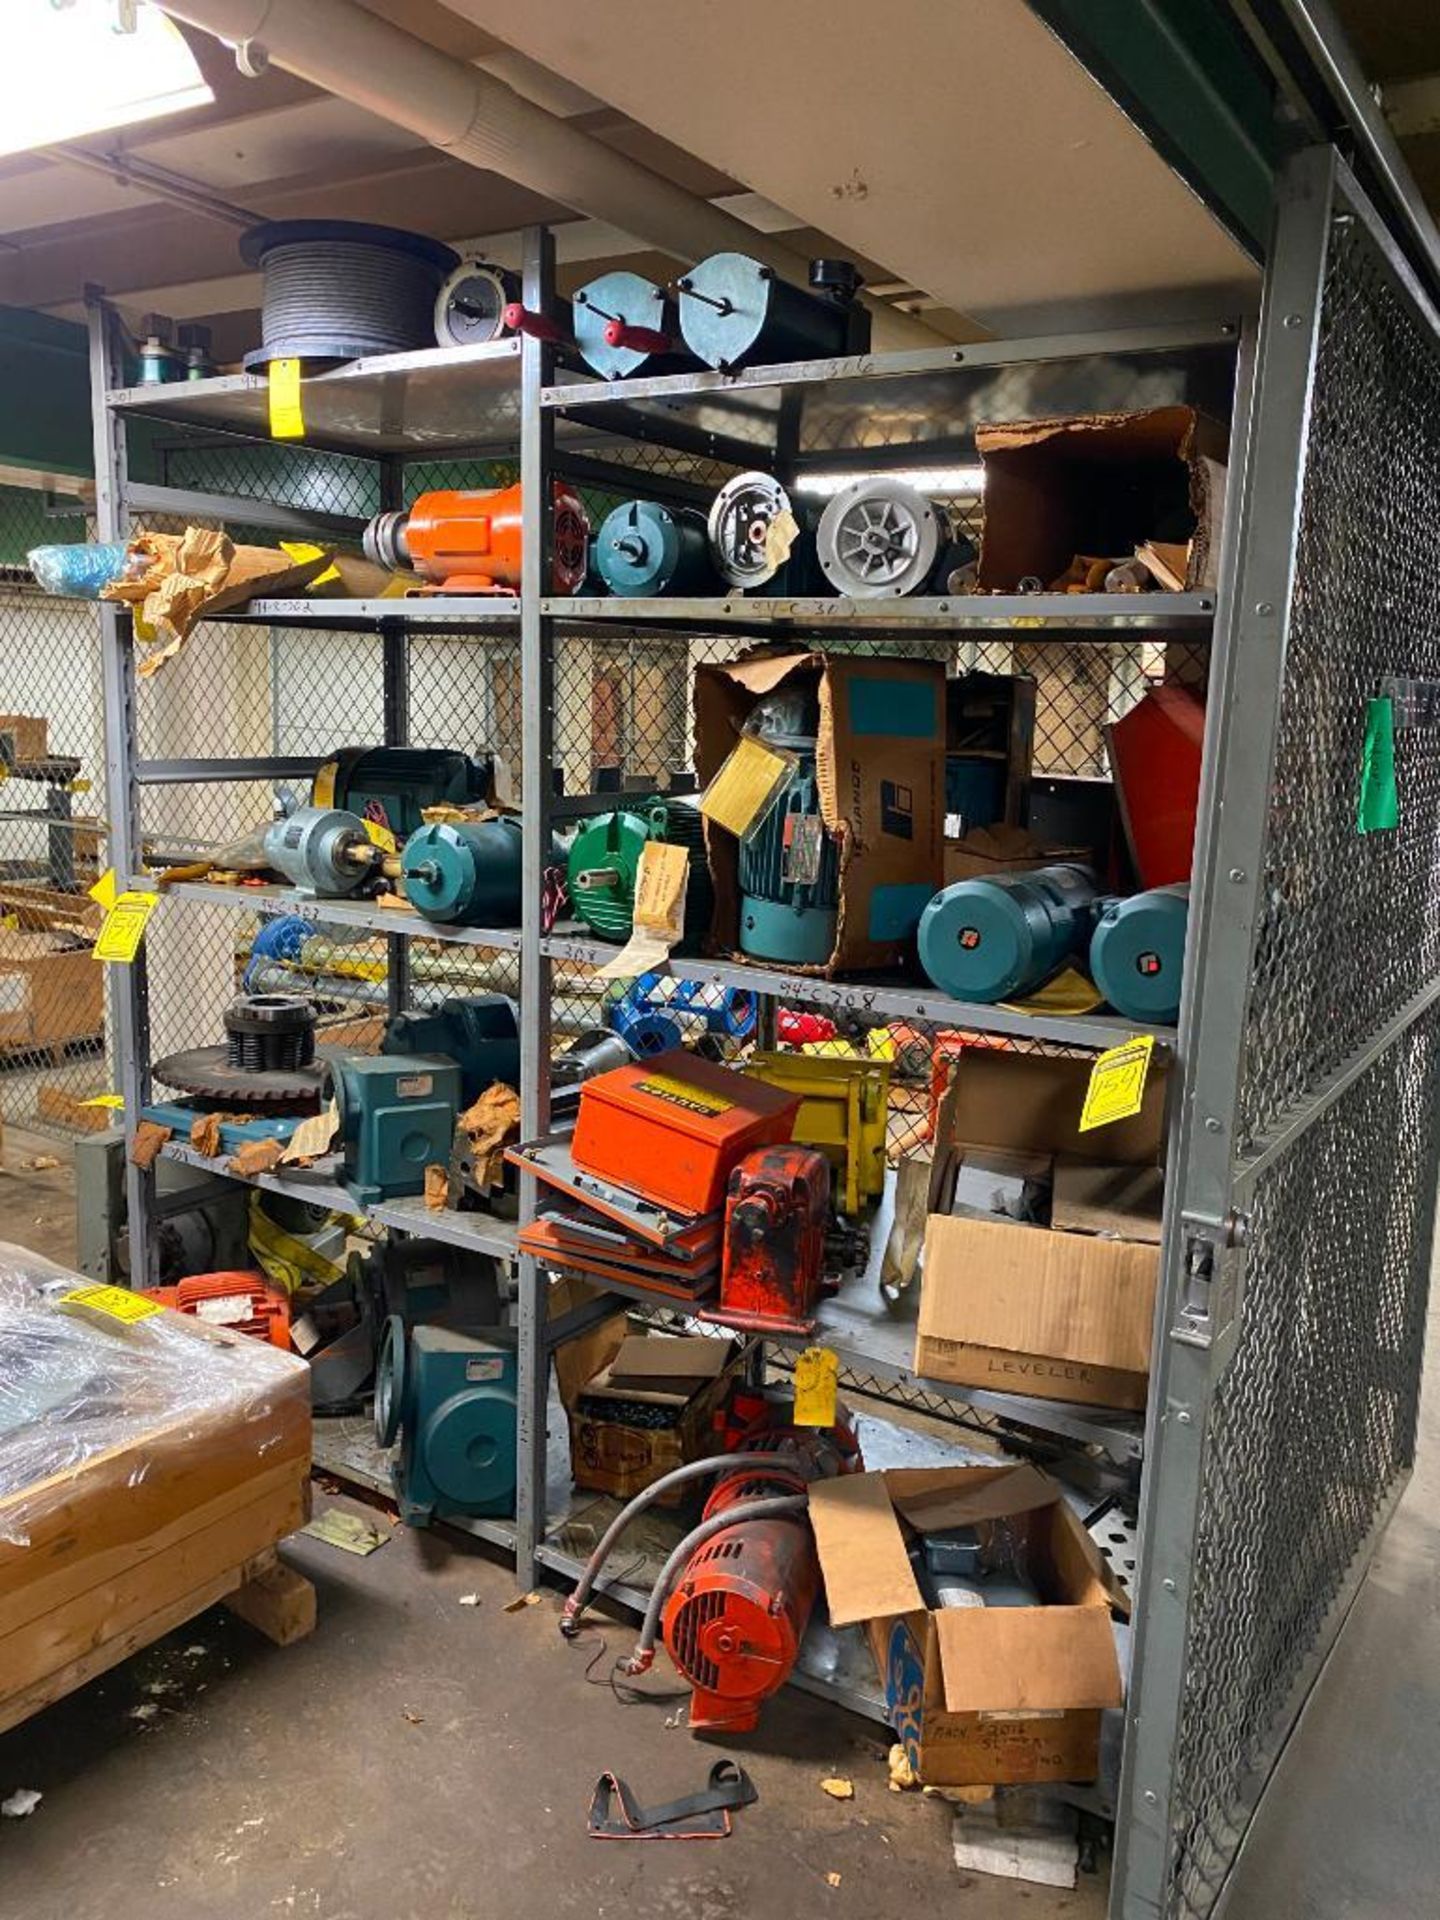 SHELF W/ CONTENT: (16+) ELECTRIC MOTORS, GEAR REDUCERS, GEARS, ELECTRICAL BOXES